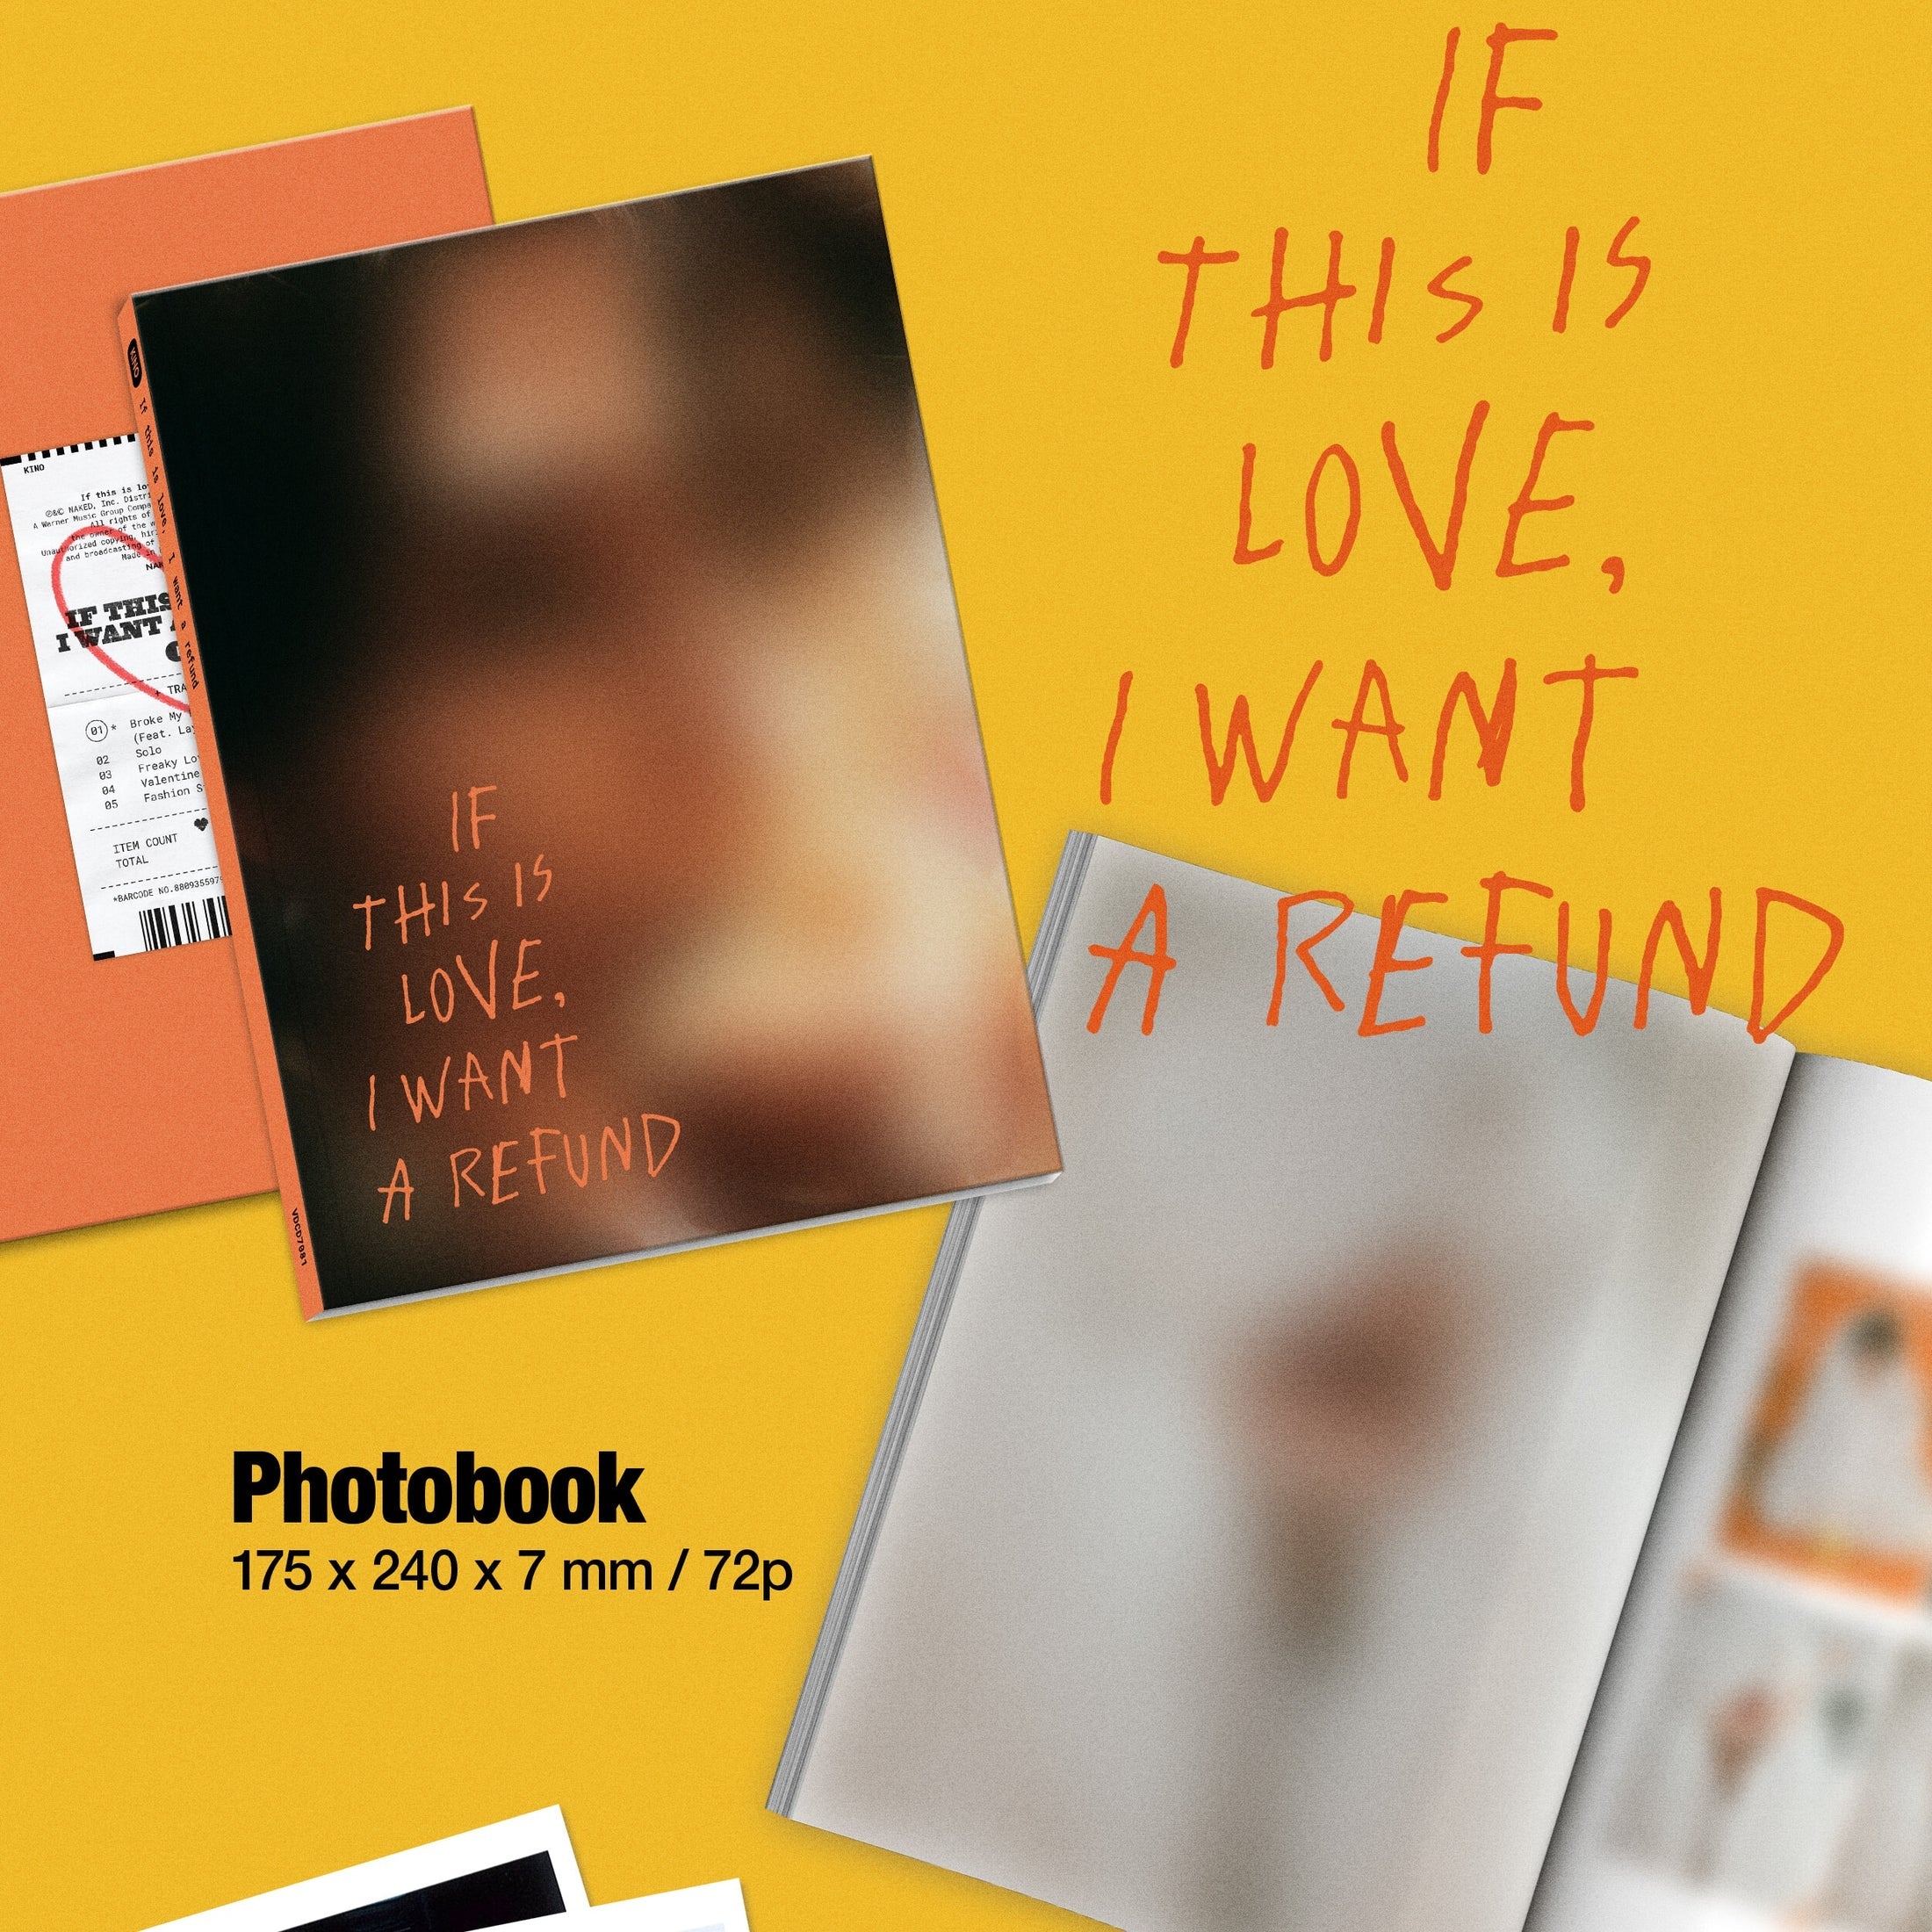 Pentagon KINO 1st EP Album "If This Is Love, I Want A Refund" (Expectation Ver.)